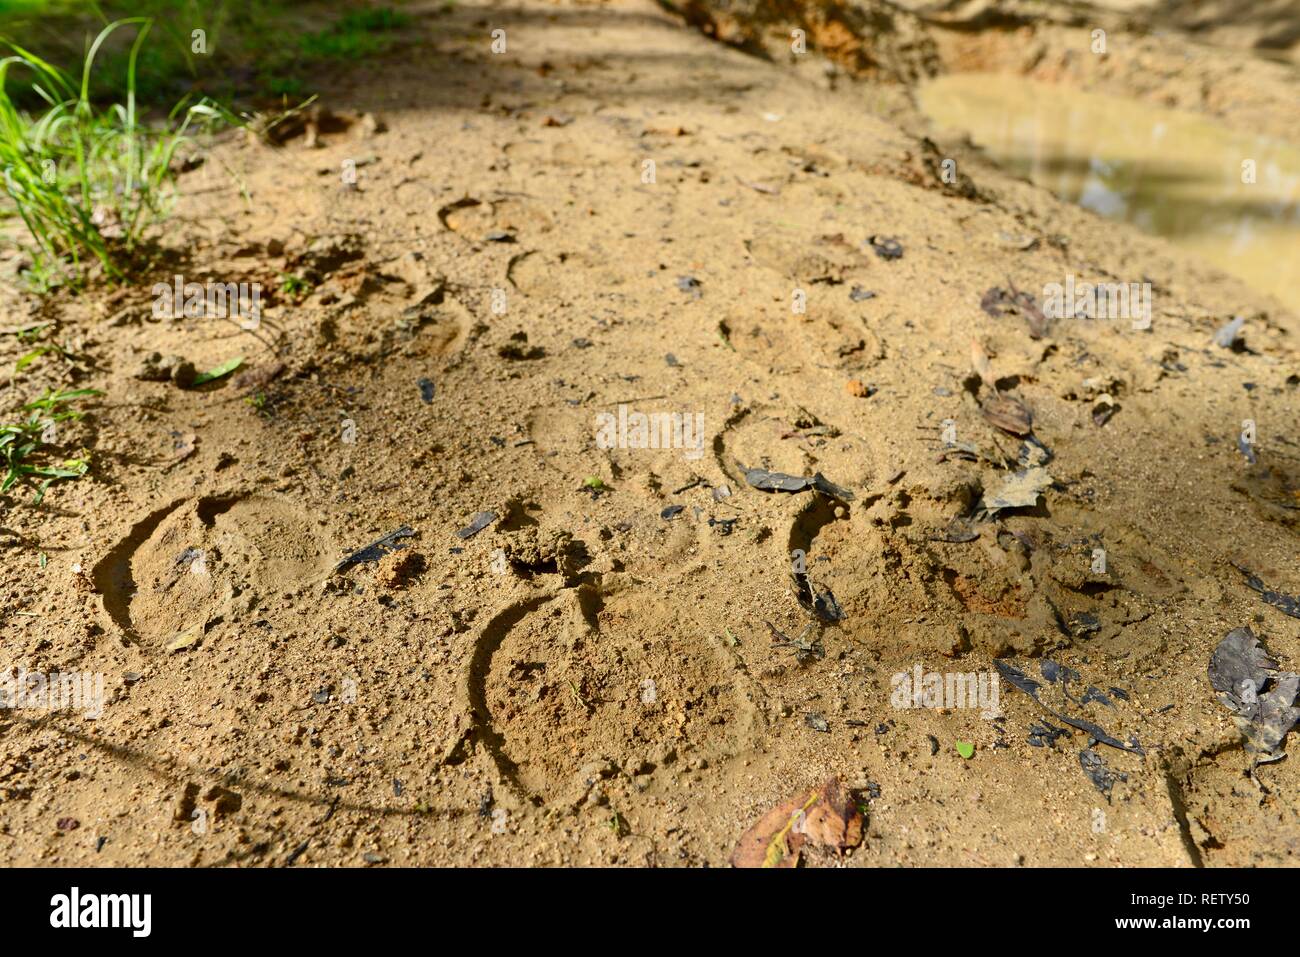 Cow hoof prints in the mud, Mia Mia State Forest, Queensland, Australia Stock Photo